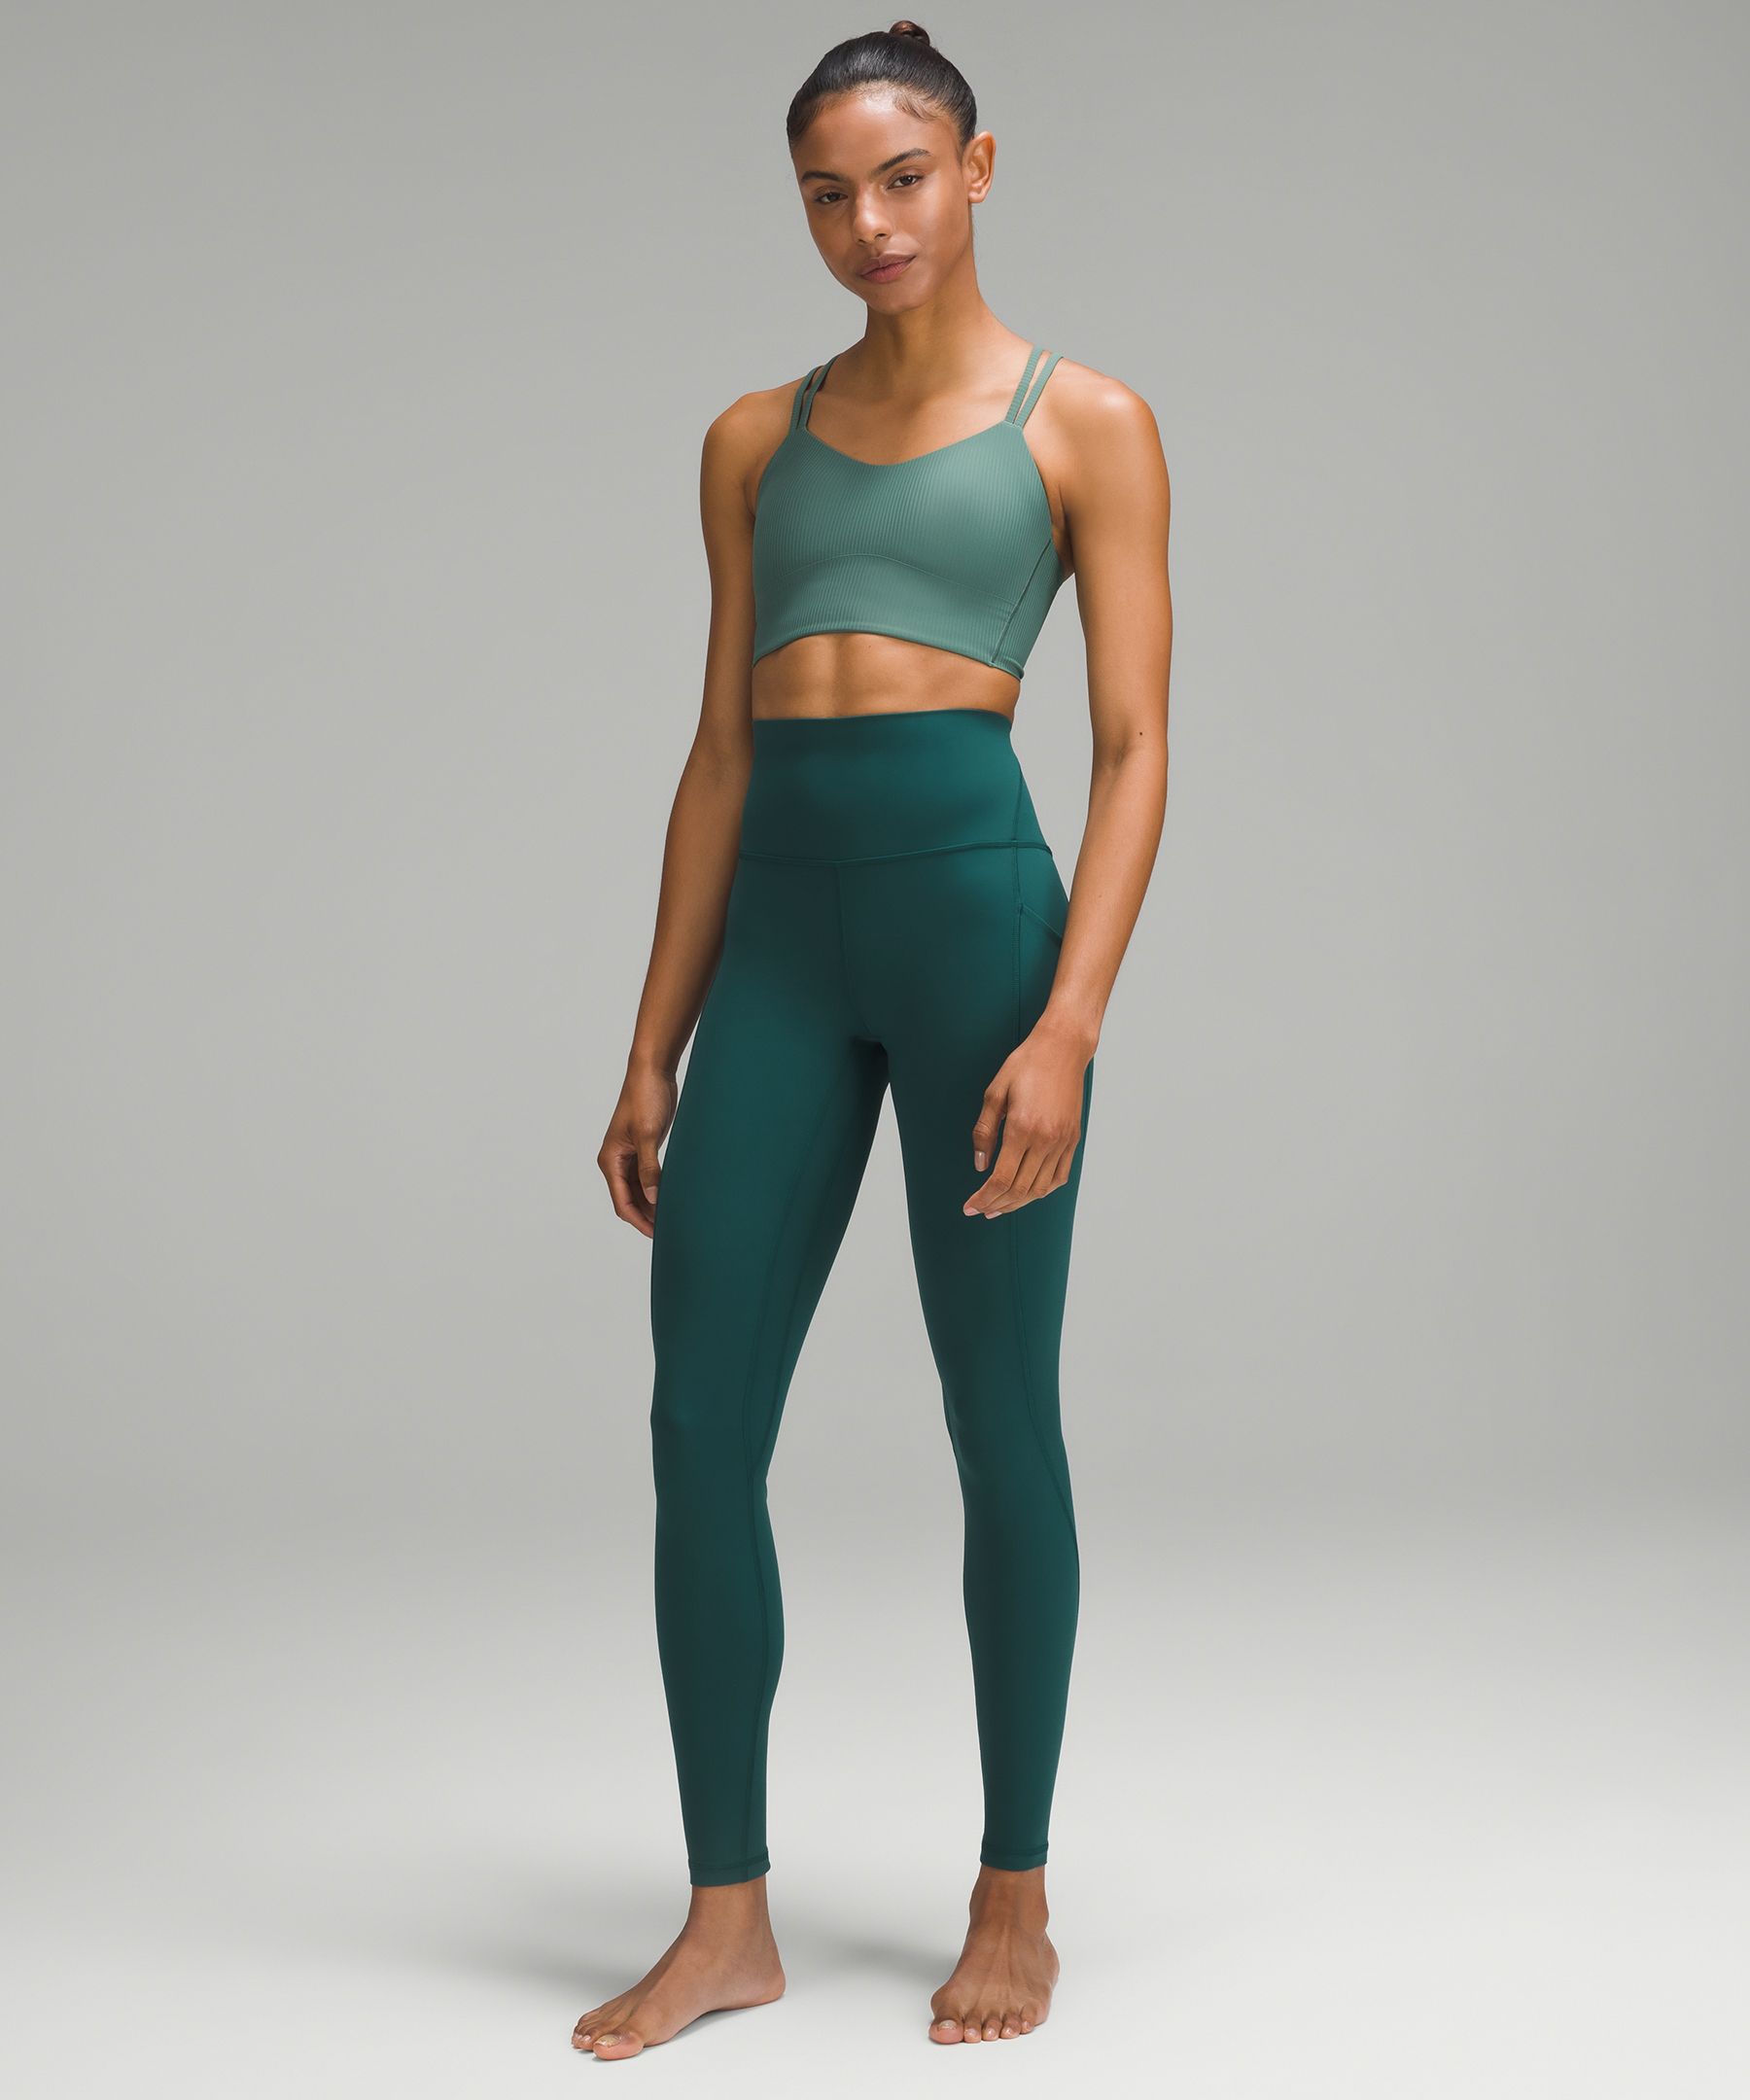 ALIGN PANT 28 - VIOLET VERBENA - Kinda wondering why these leggings that  I've been trying to get my hands on for almost 3 weeks now has completely  disappeared off the U.S.